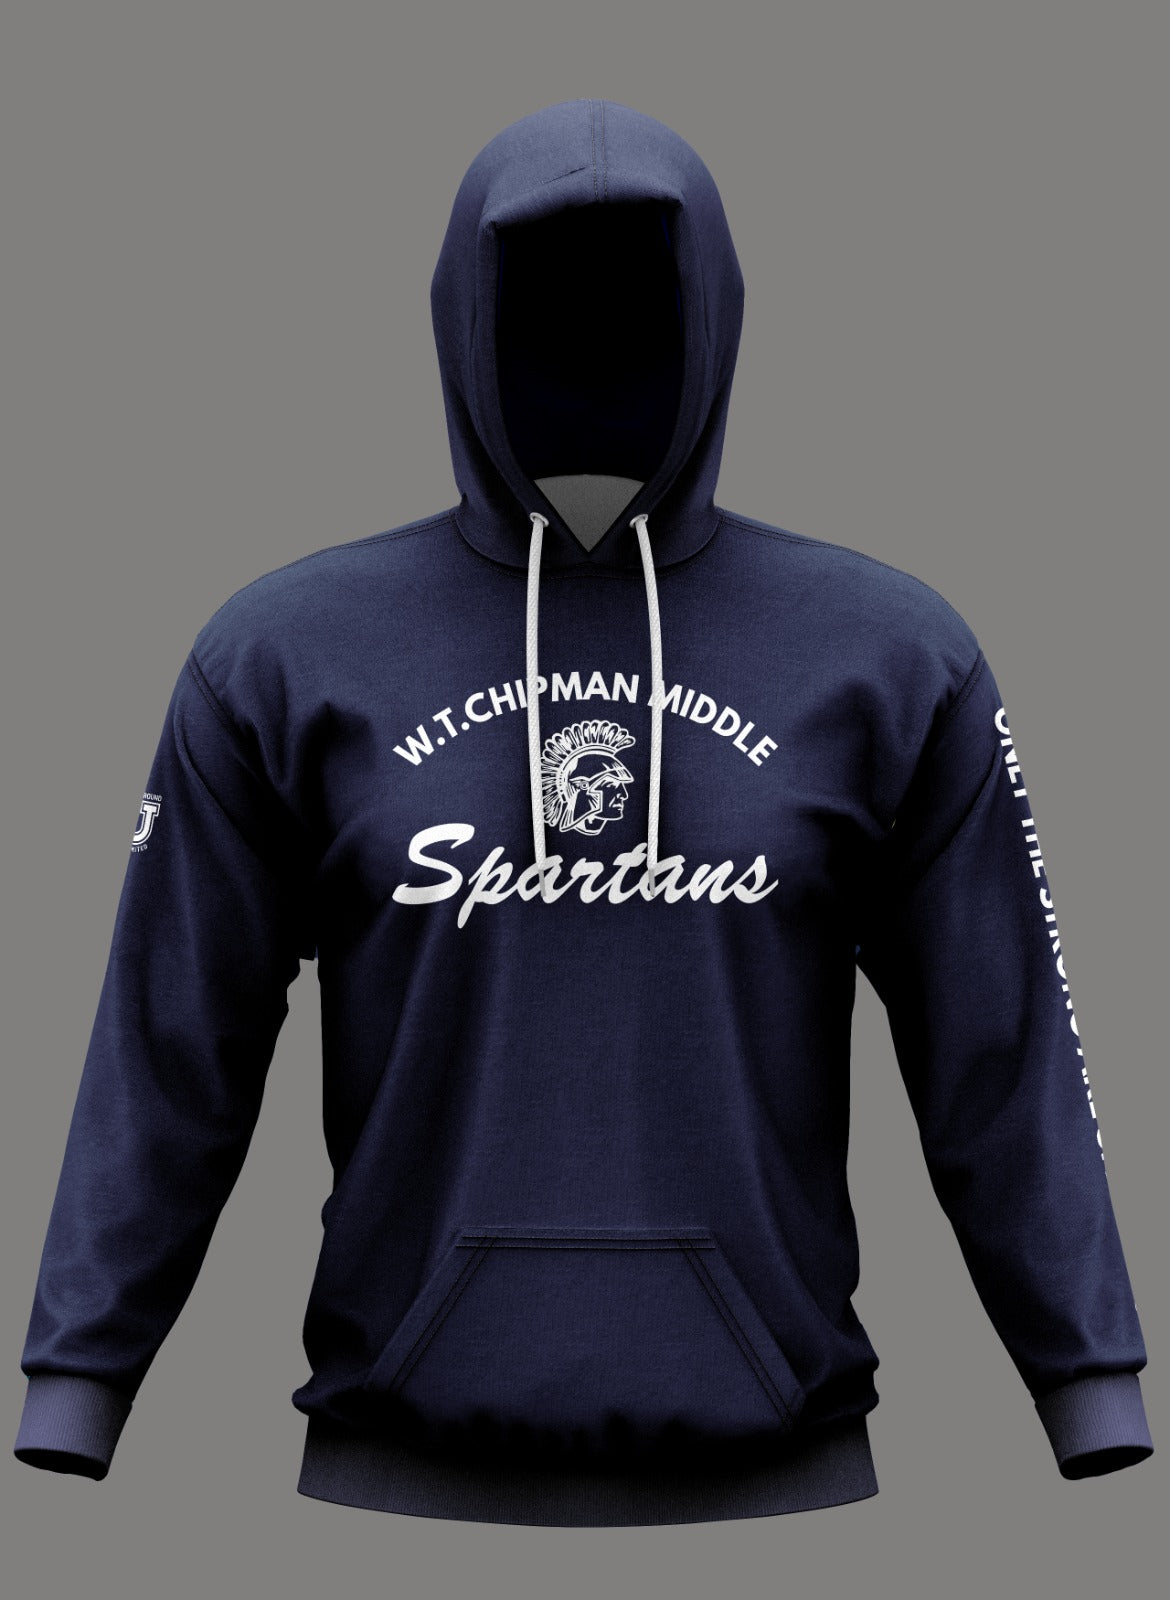 W.T. Chipman Performance Hoodie ~ Spartan Script Navy "Only the Strong are Spartans"